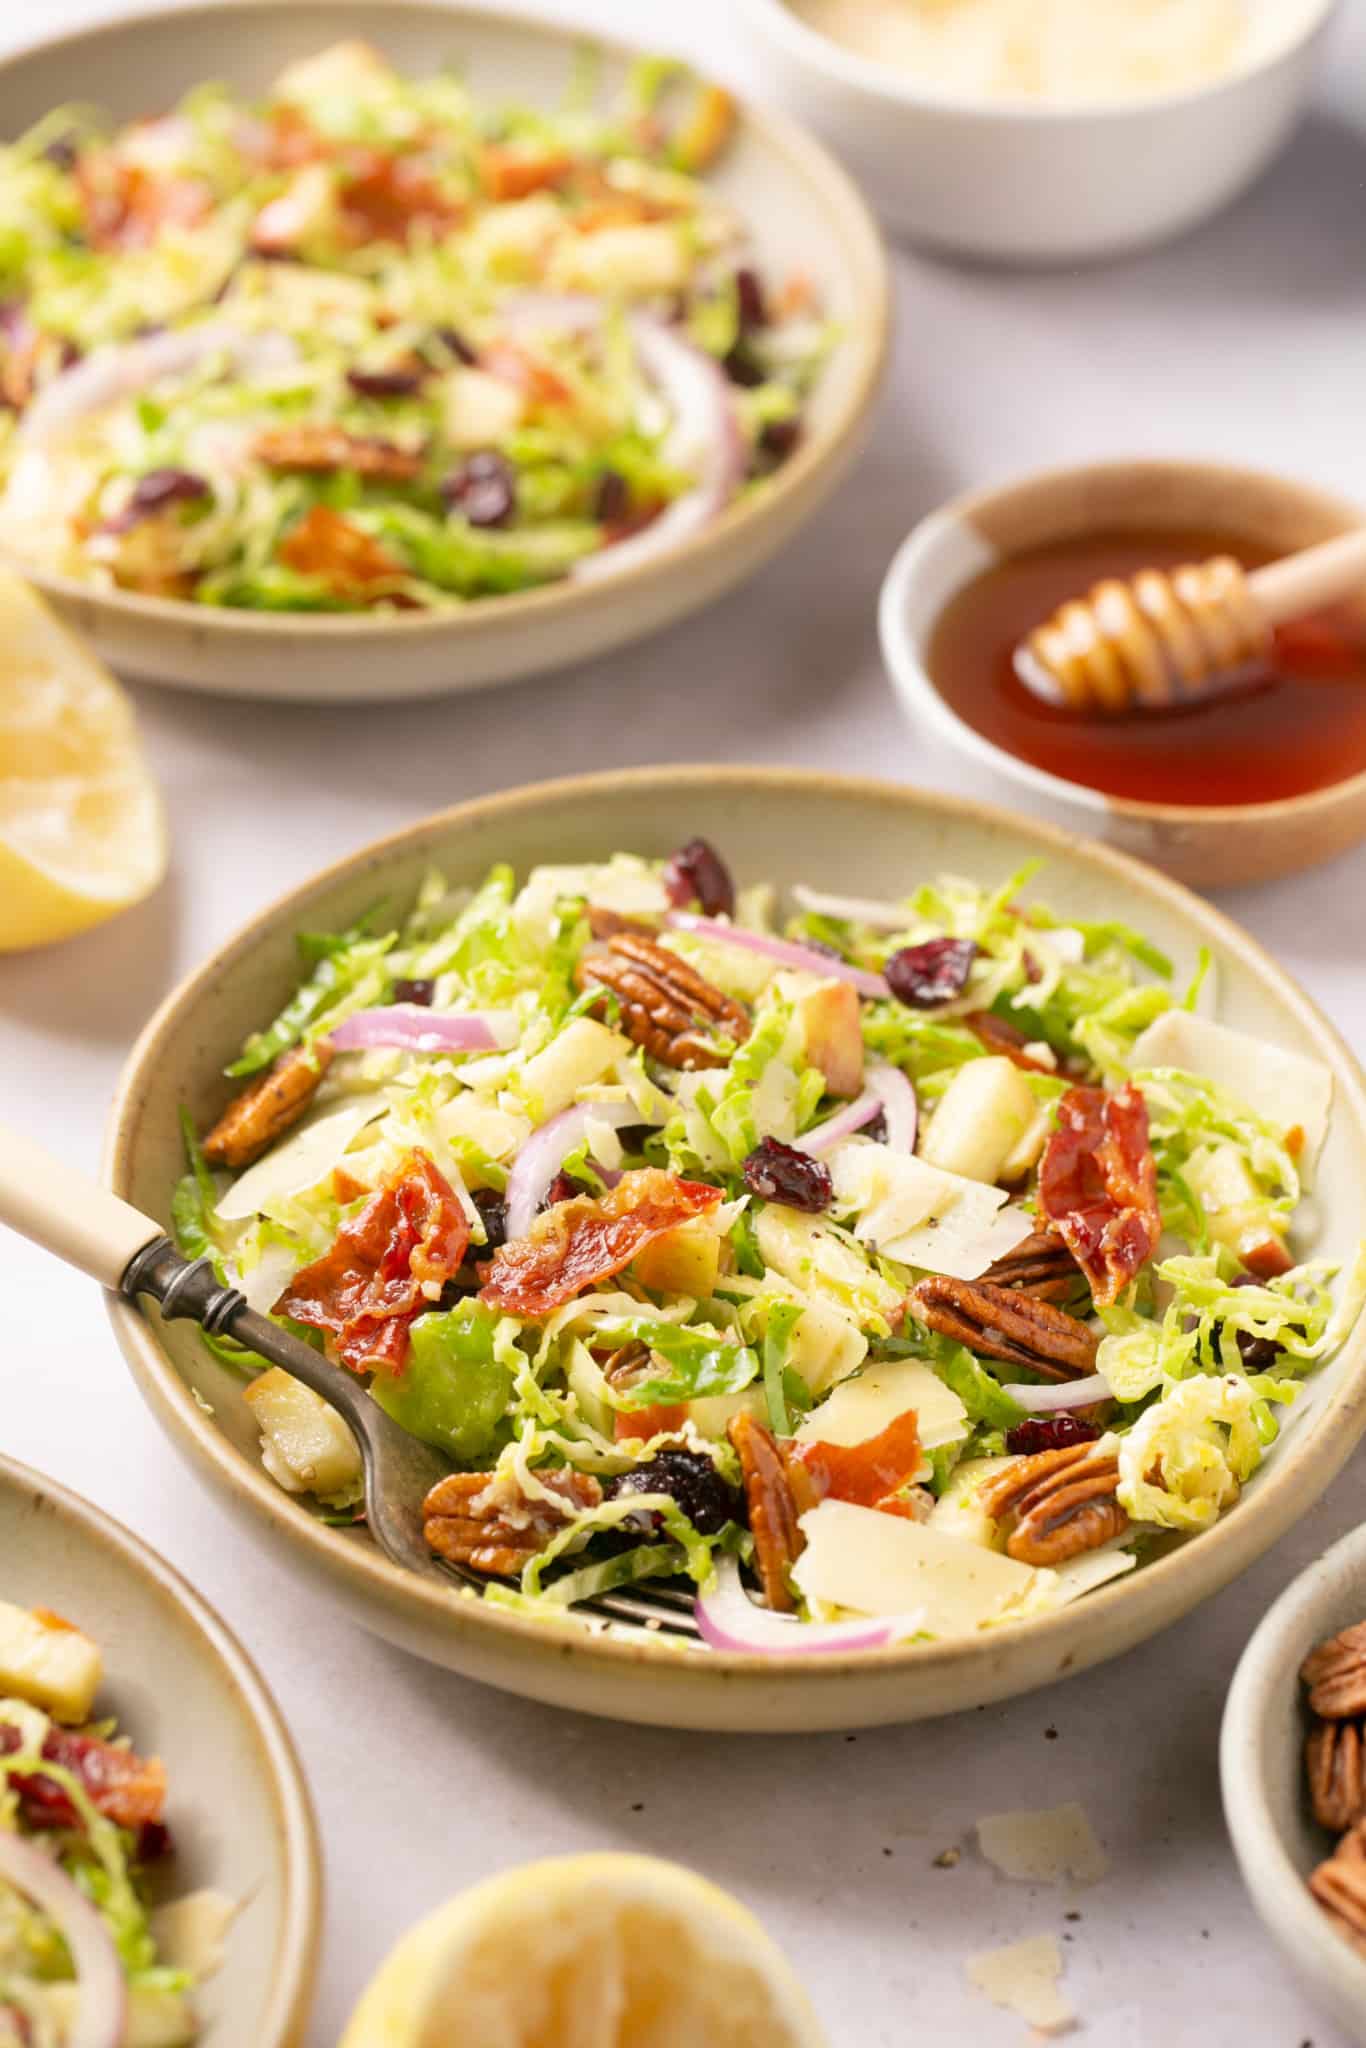 colorful salad in a bowl with a fork featuring lettuce, nuts, raisins, onions, and bacon